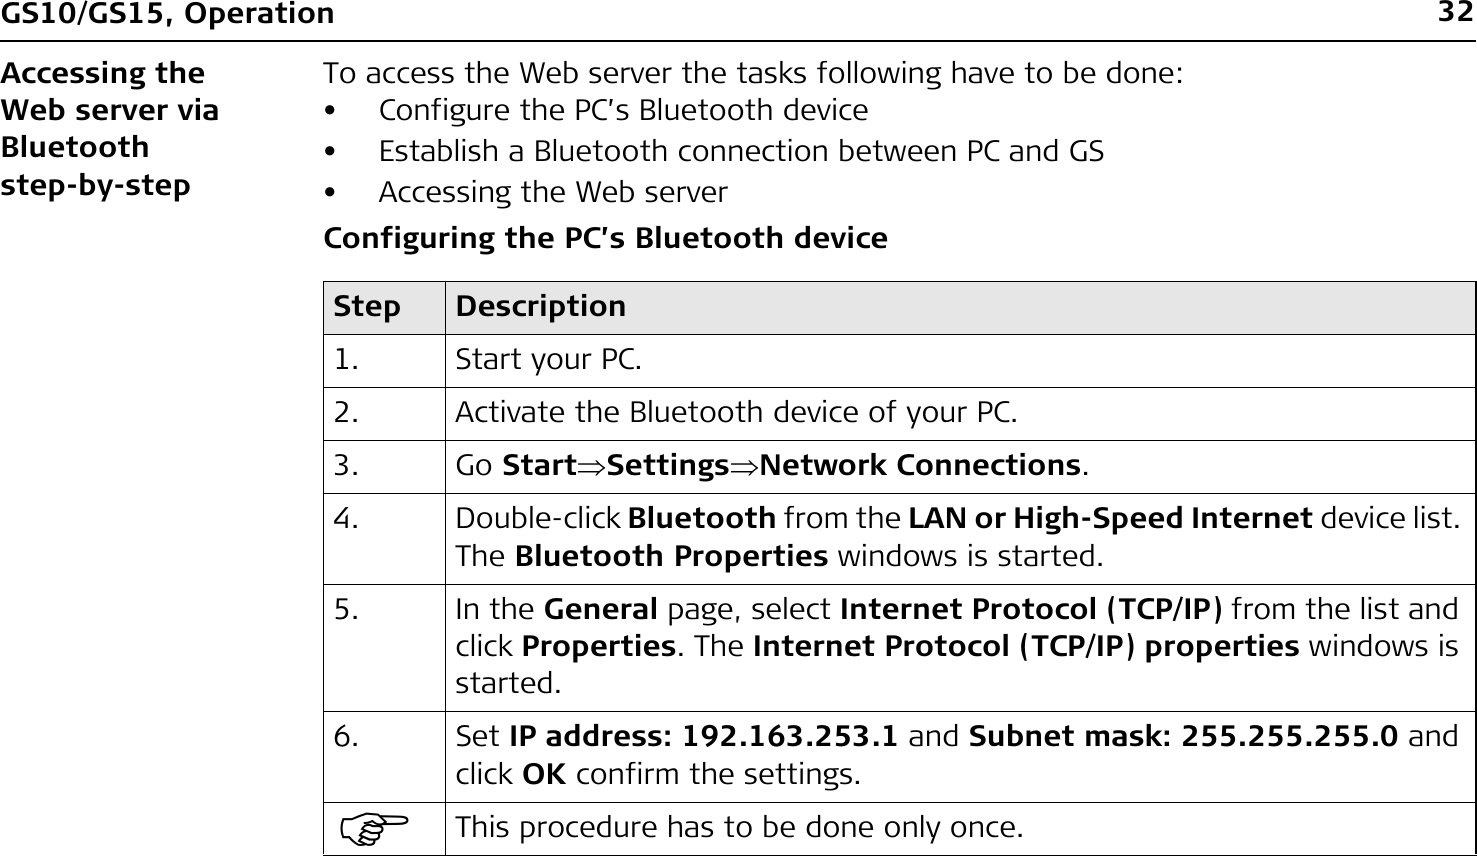 32GS10/GS15, OperationAccessing the Web server via Bluetooth step-by-stepTo access the Web server the tasks following have to be done: • Configure the PC’s Bluetooth device• Establish a Bluetooth connection between PC and GS• Accessing the Web serverConfiguring the PC’s Bluetooth deviceStep Description1. Start your PC.2. Activate the Bluetooth device of your PC.3. Go StartSettingsNetwork Connections.4. Double-click Bluetooth from the LAN or High-Speed Internet device list. The Bluetooth Properties windows is started.5. In the General page, select Internet Protocol (TCP/IP) from the list and click Properties. The Internet Protocol (TCP/IP) properties windows is started.6. Set IP address: 192.163.253.1 and Subnet mask: 255.255.255.0 and click OK confirm the settings.)This procedure has to be done only once.